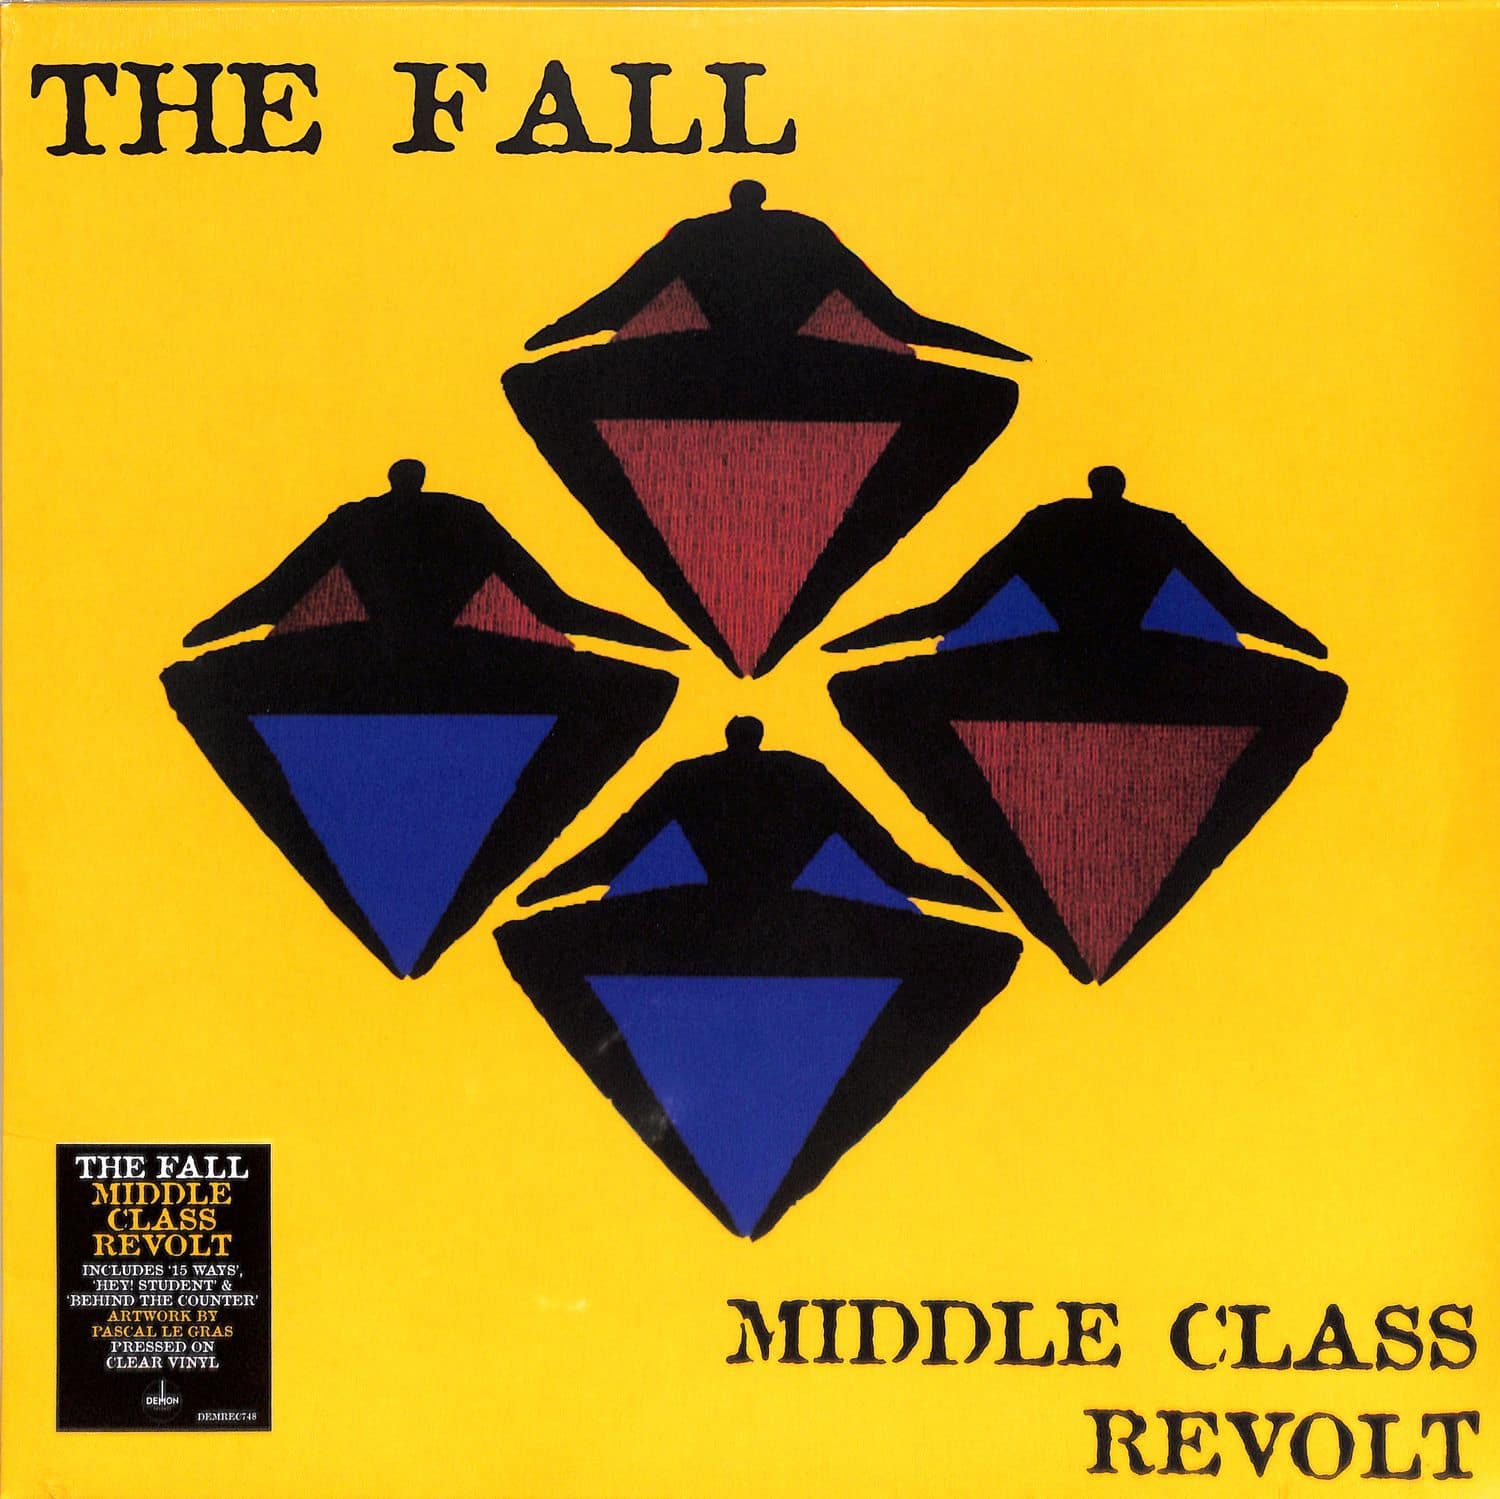 The Fall - MIDDLE CLASS REVOLT 